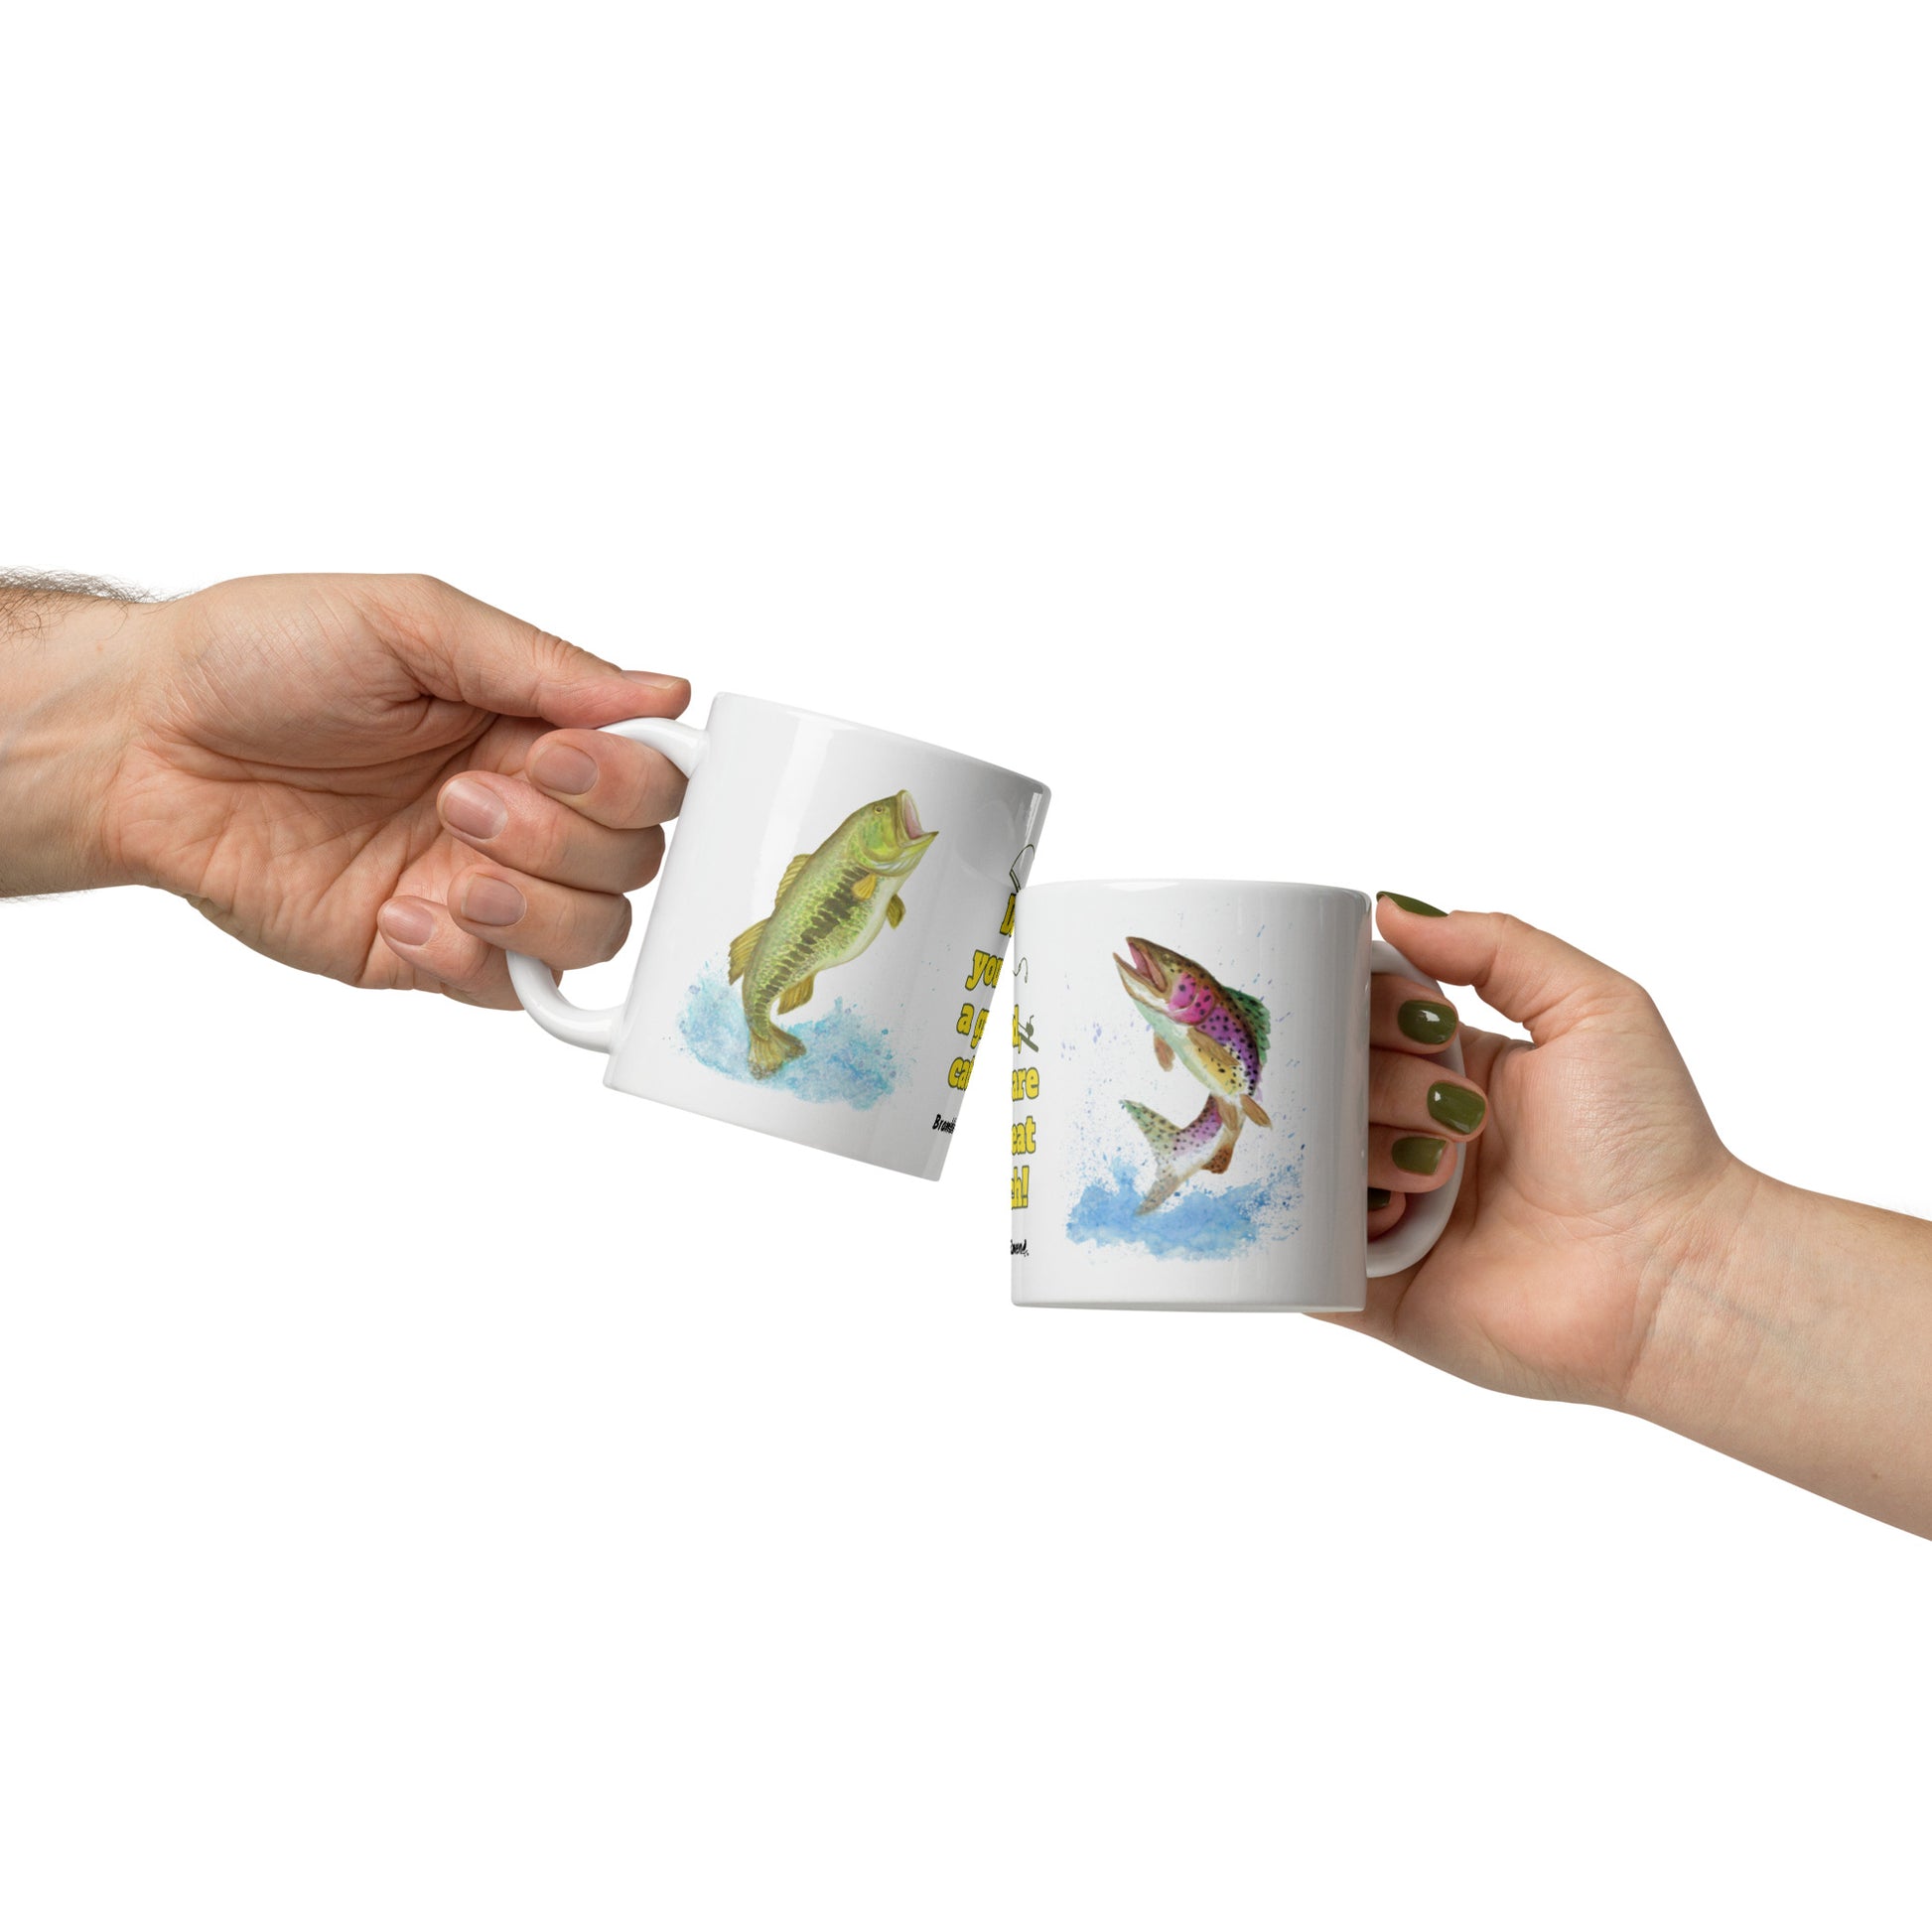 11 ounce ceramic mug. Features watercolor print of a rainbow trout and a largemouth bass with text that says: Dad, you are a great catch! Image shows two mugs in two hands.